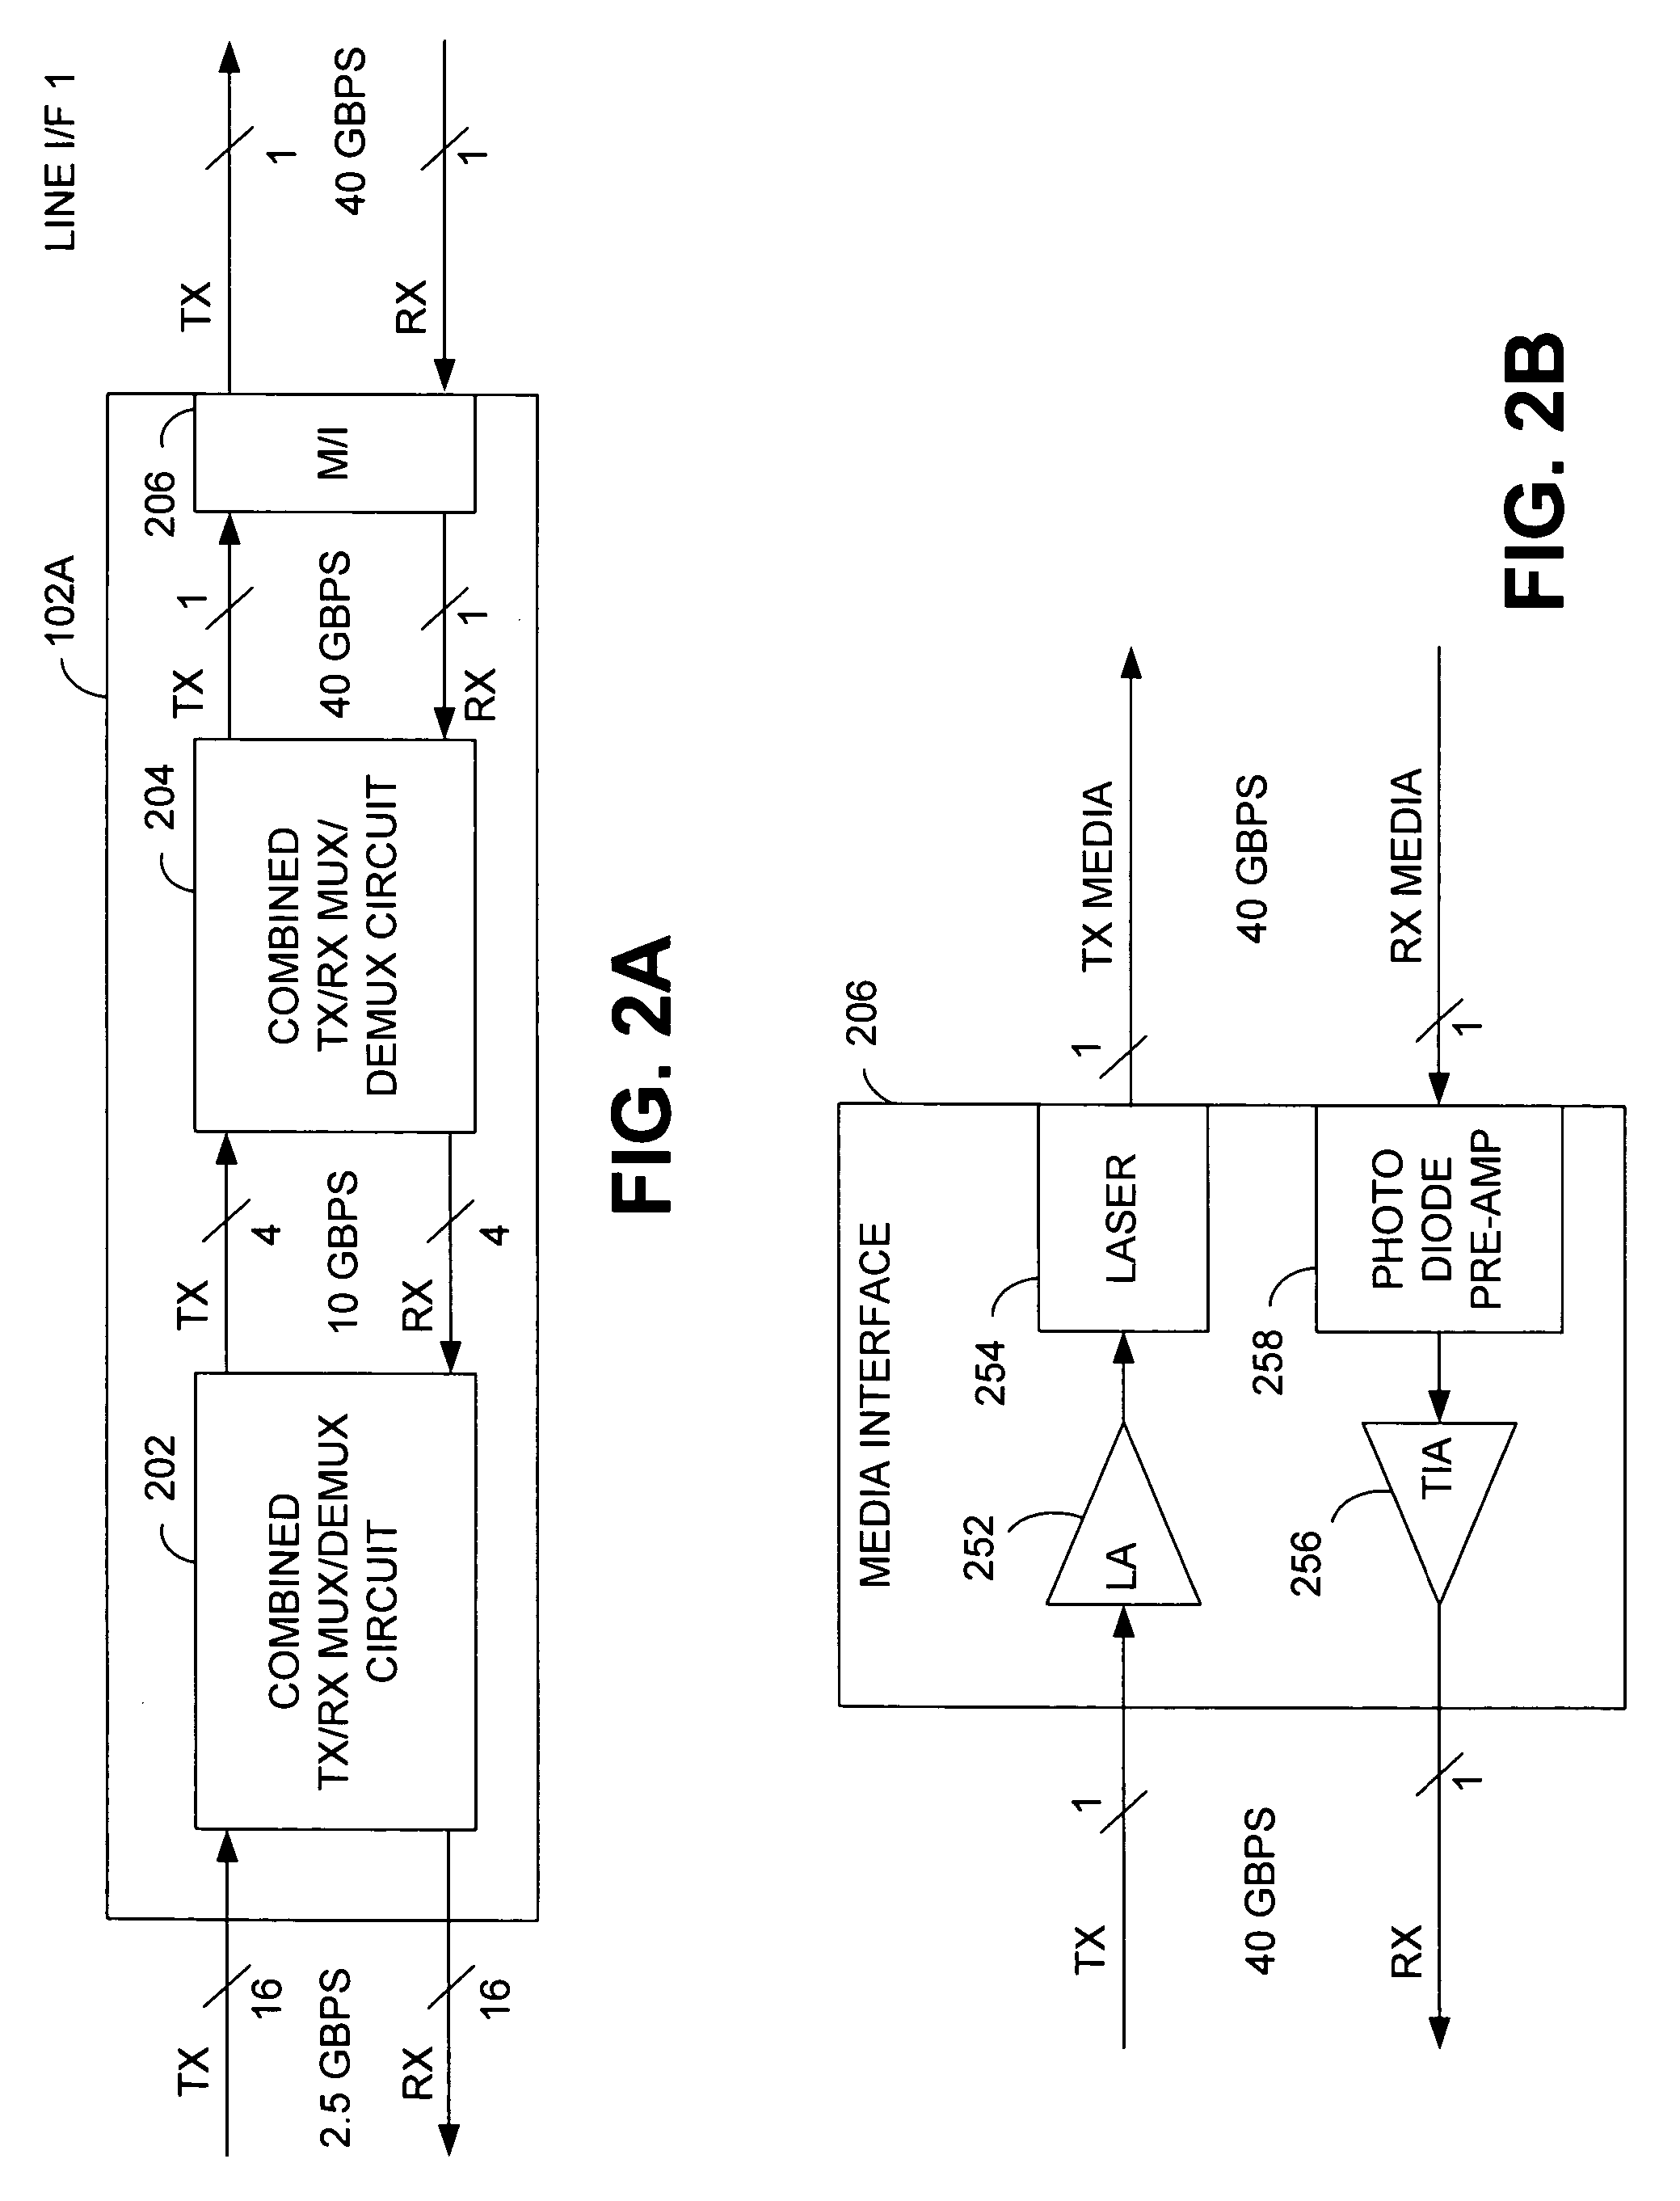 Switchable power domains for 1.2v and 3.3v pad voltages